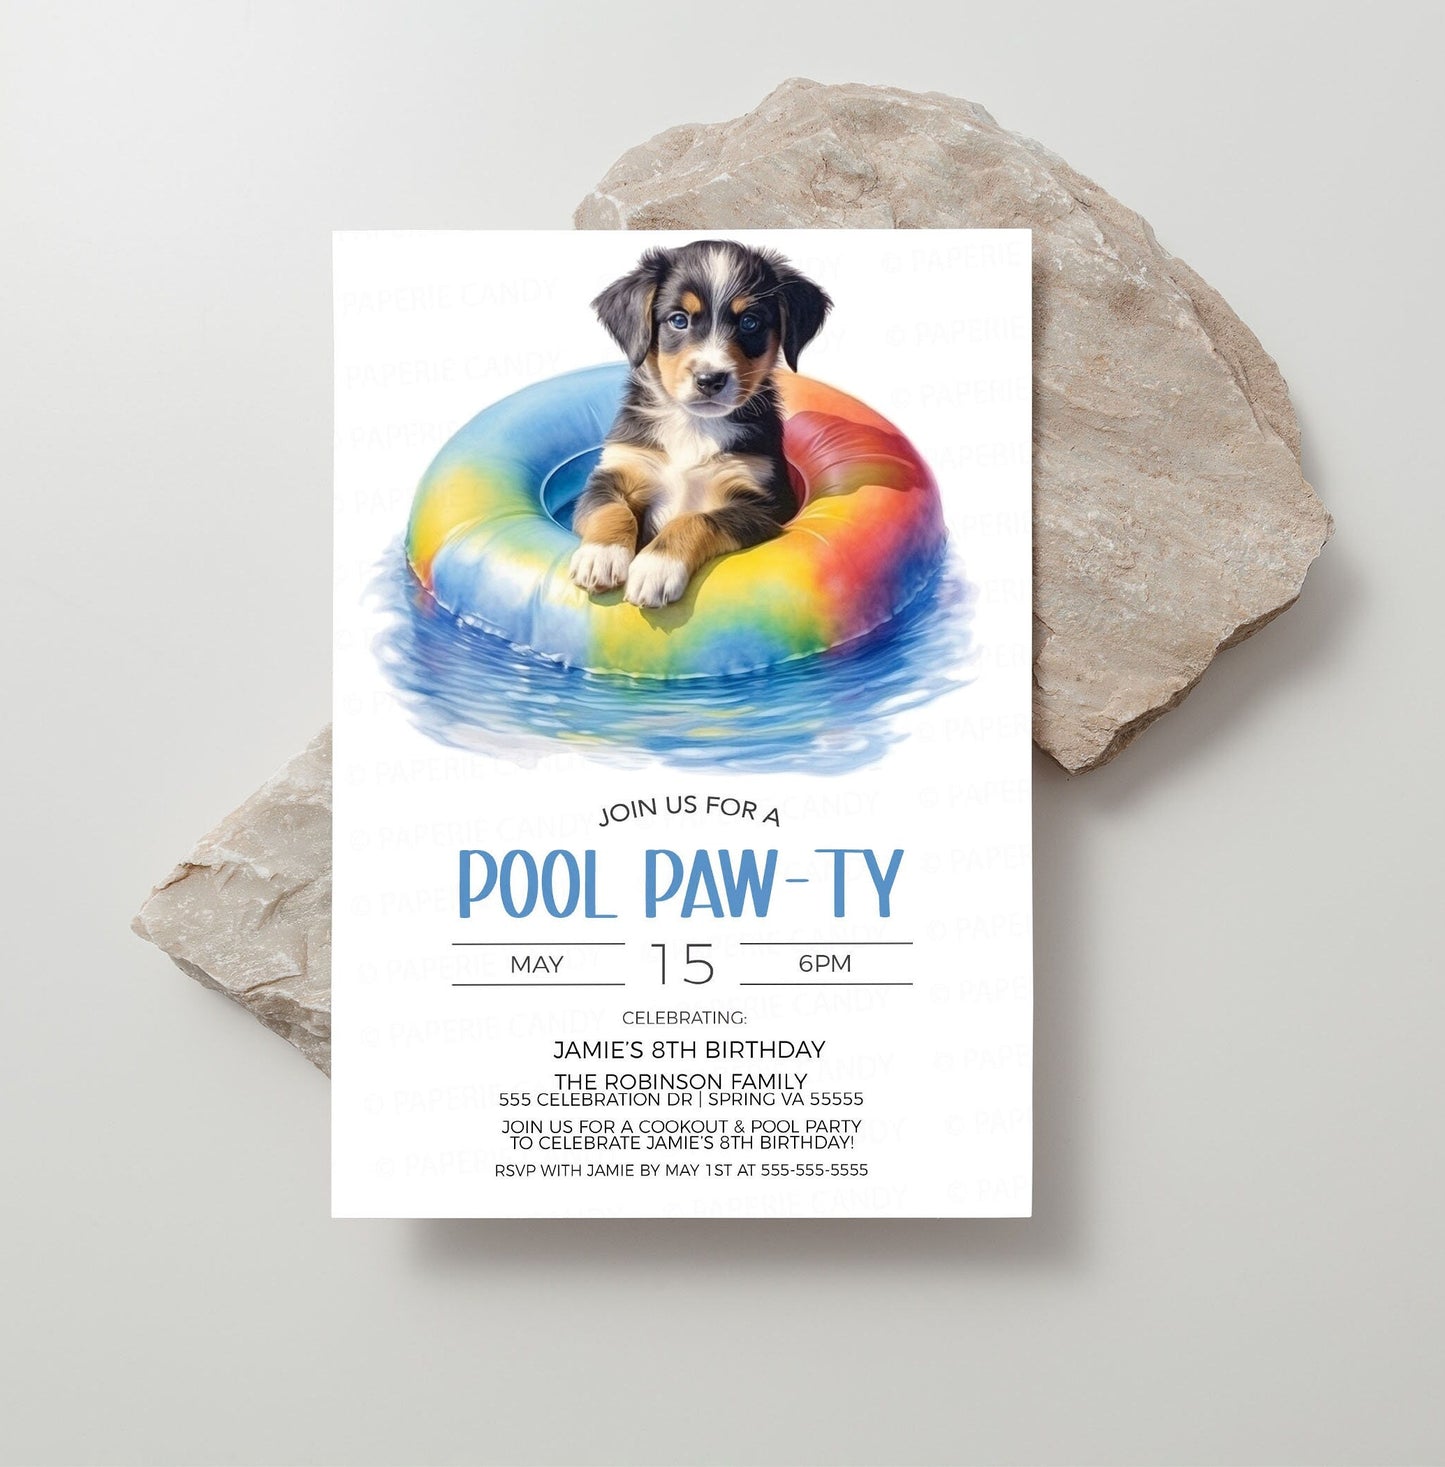 Dog Pool Party Invitation, Puppy Pawty Invite, Puppies Dogs Birthday Party, Let's Pawty, Calling All Pawty Animals, Editable Printable